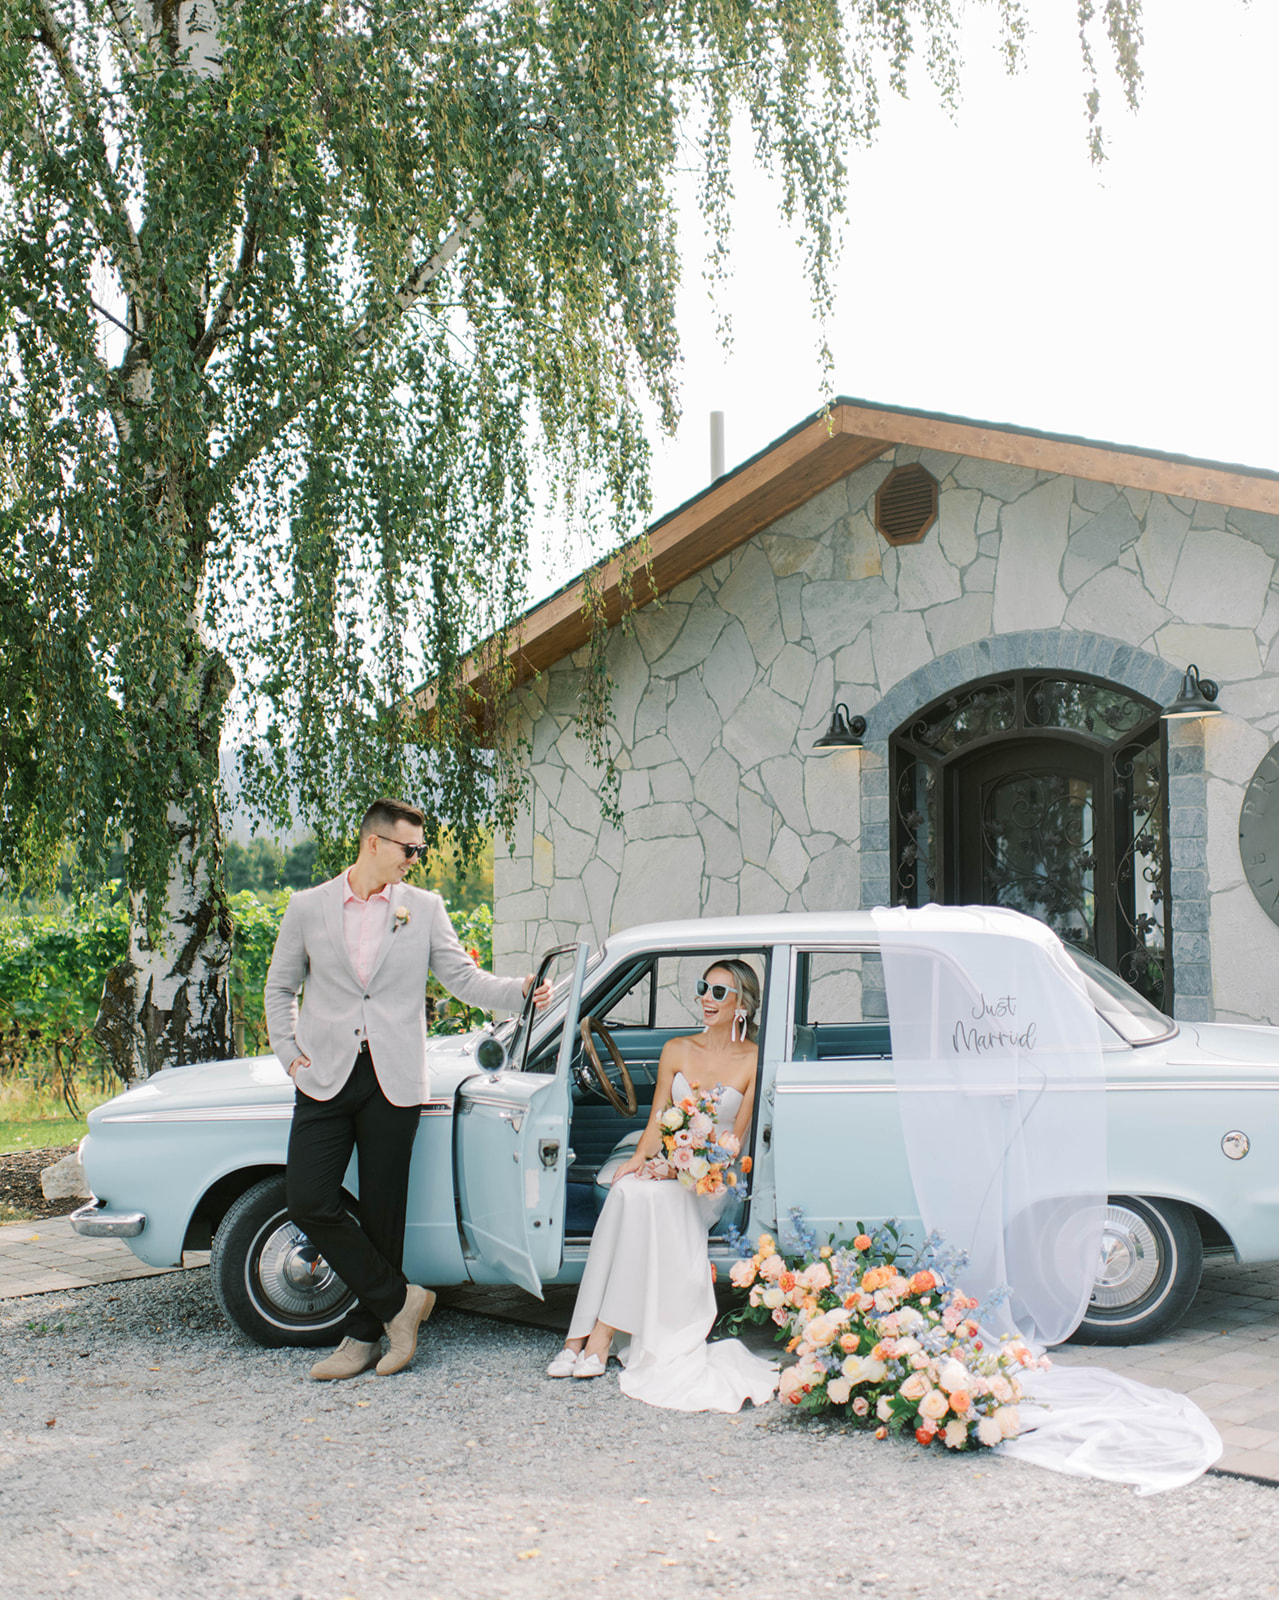 Vintage car rental from Mabel Mae for weddings showcasing beautiful blue wedding inspiration with summer wedding florals, ideas for summer wedding attire for groom, bride and groom smiling bringing warmth and joy to their summer wedding